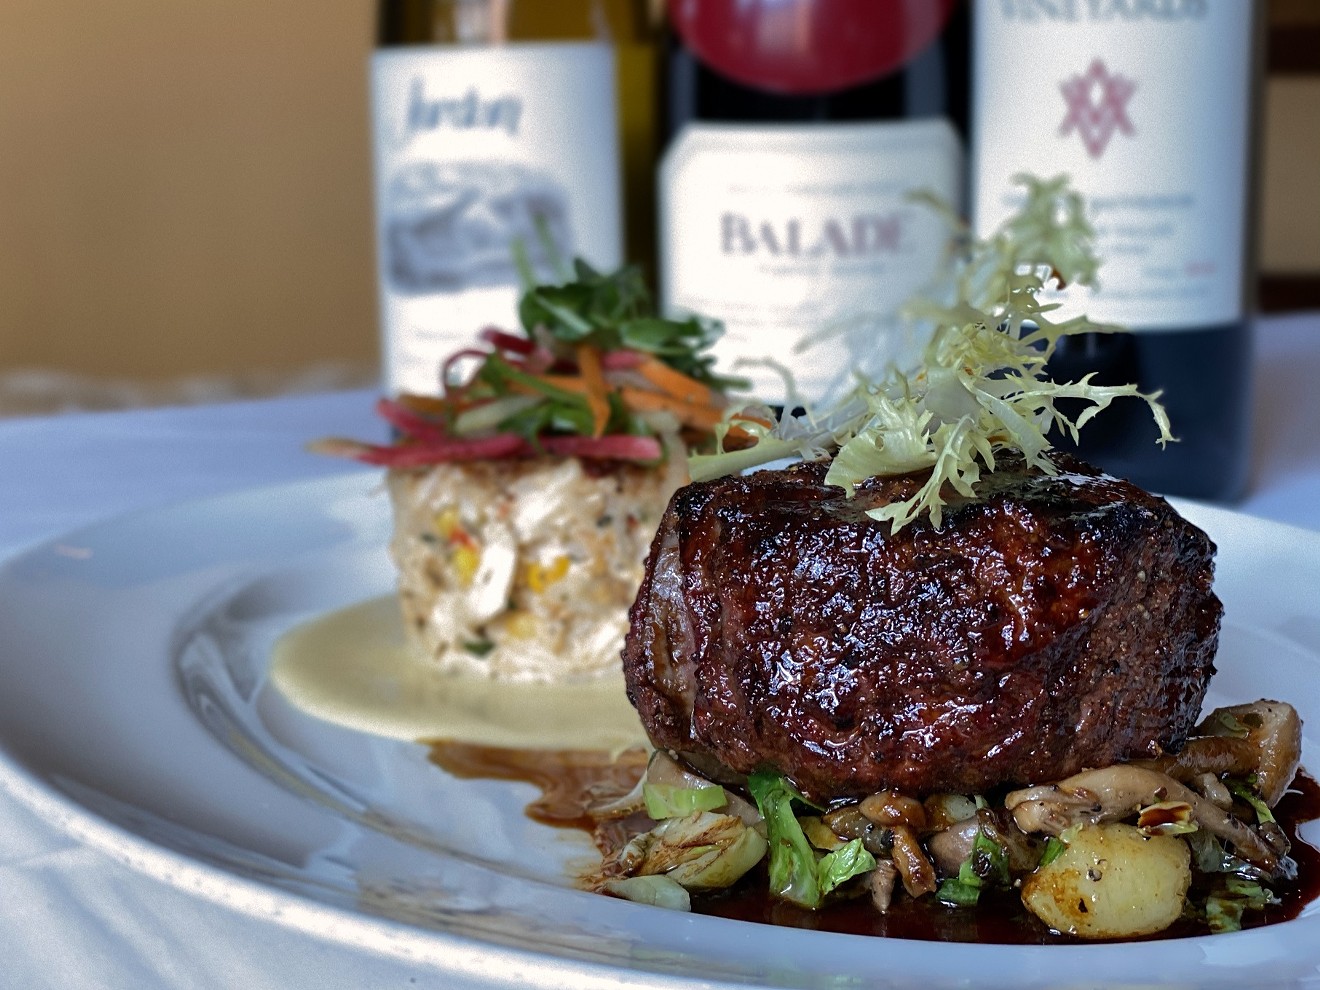 Toast to date night with Brennan's $99 Wine and Dine for Two deal this September.